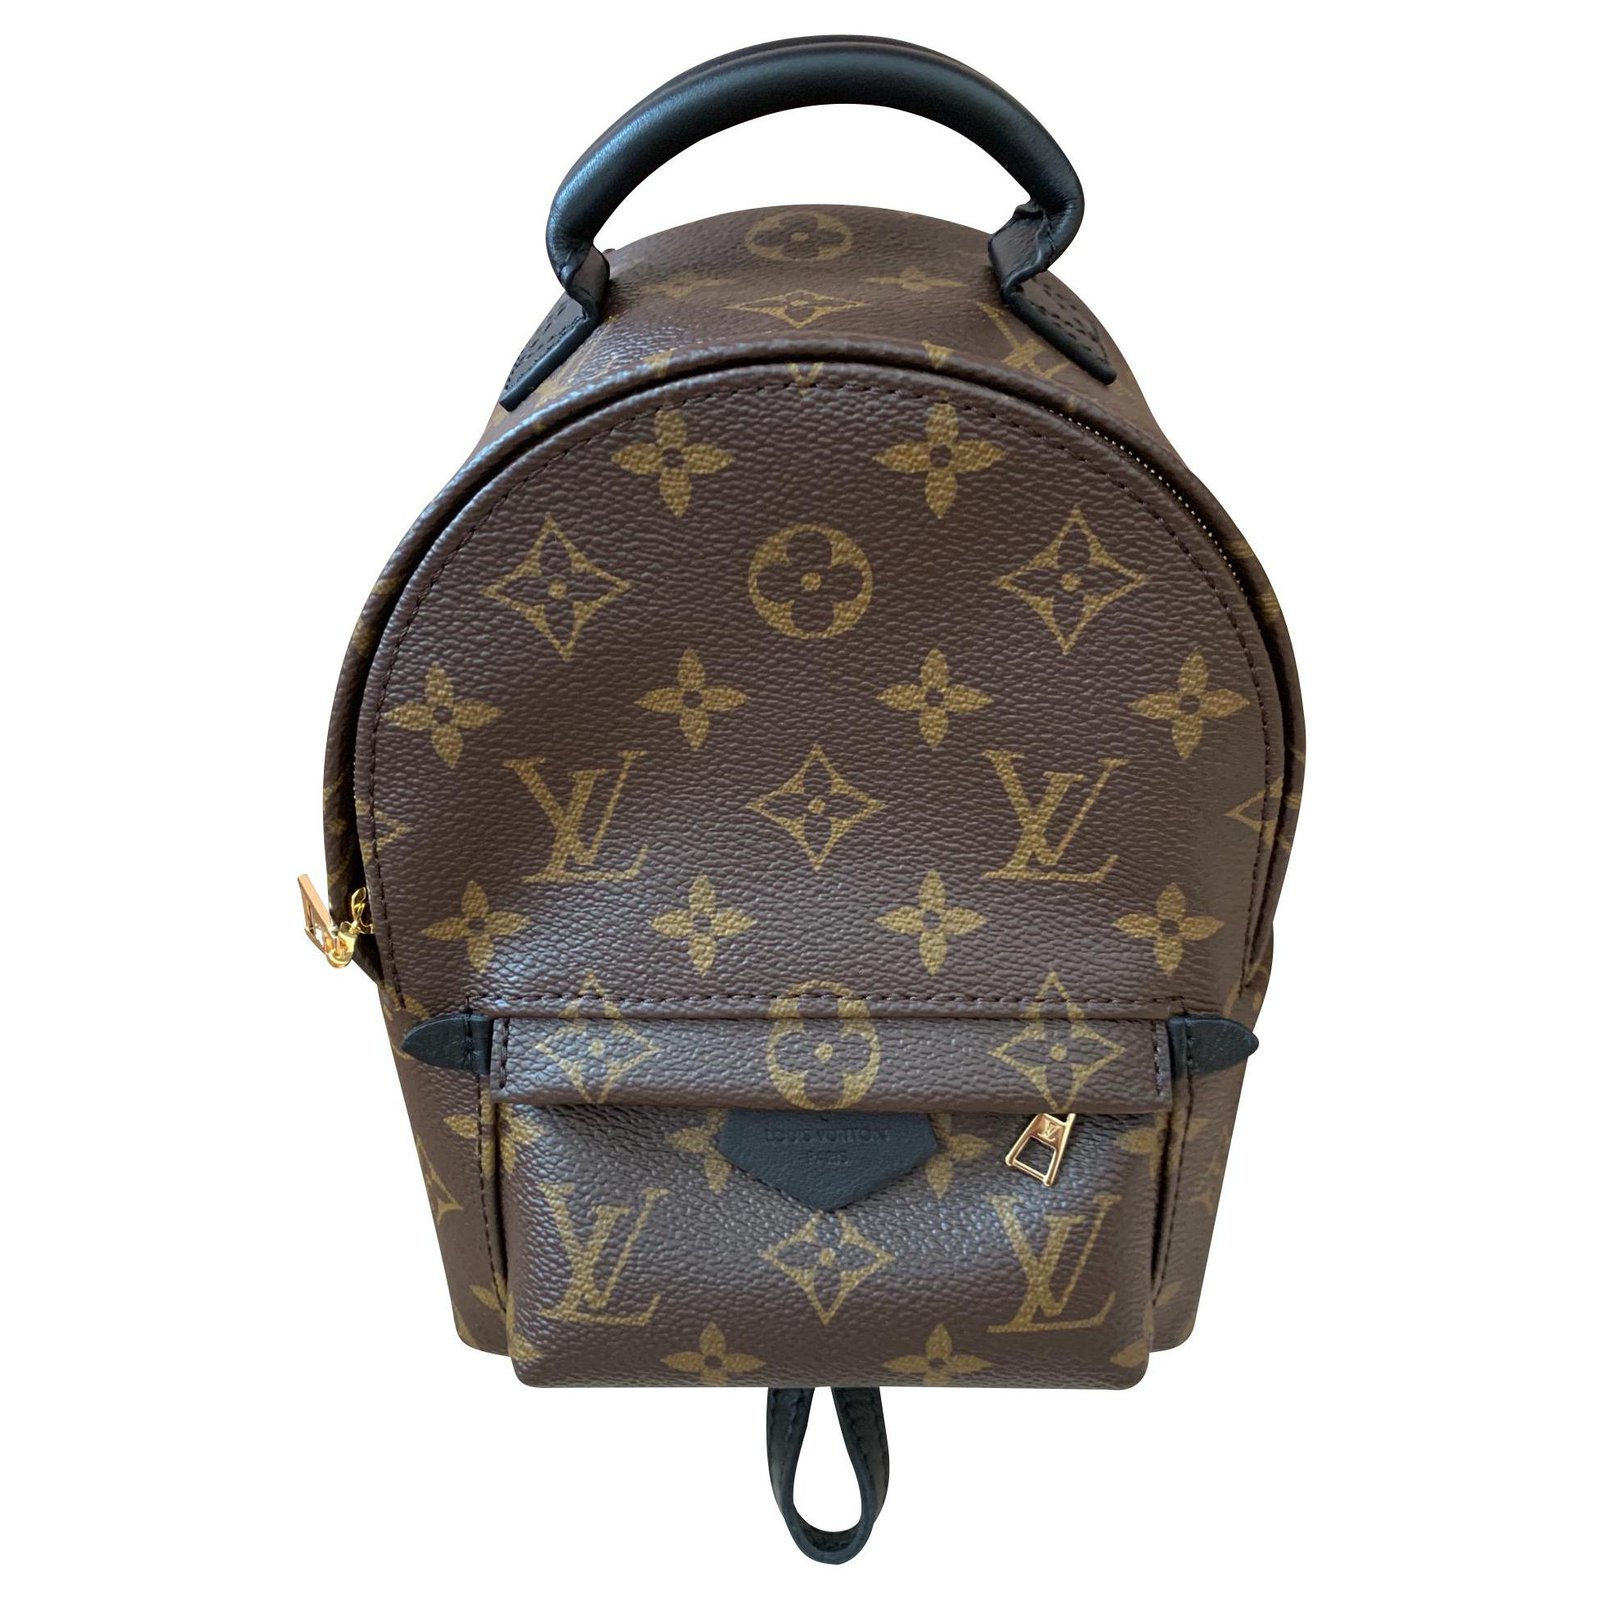 Palm Spring Mini backpack  Palm springs mini backpack, Backpack brands,  Louis vuitton